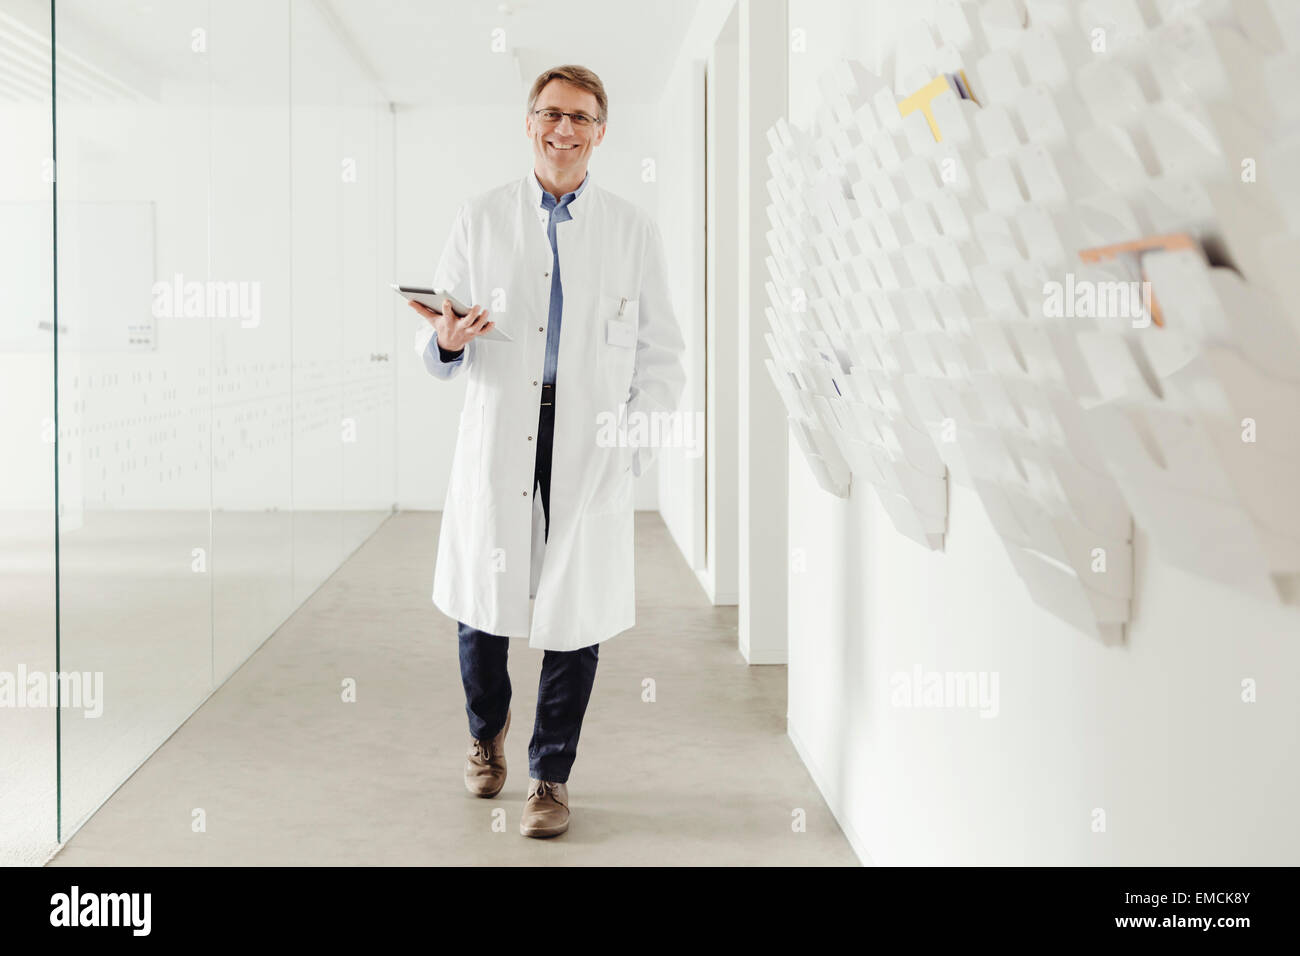 Smiling young man in lab coat walking in hallway Banque D'Images